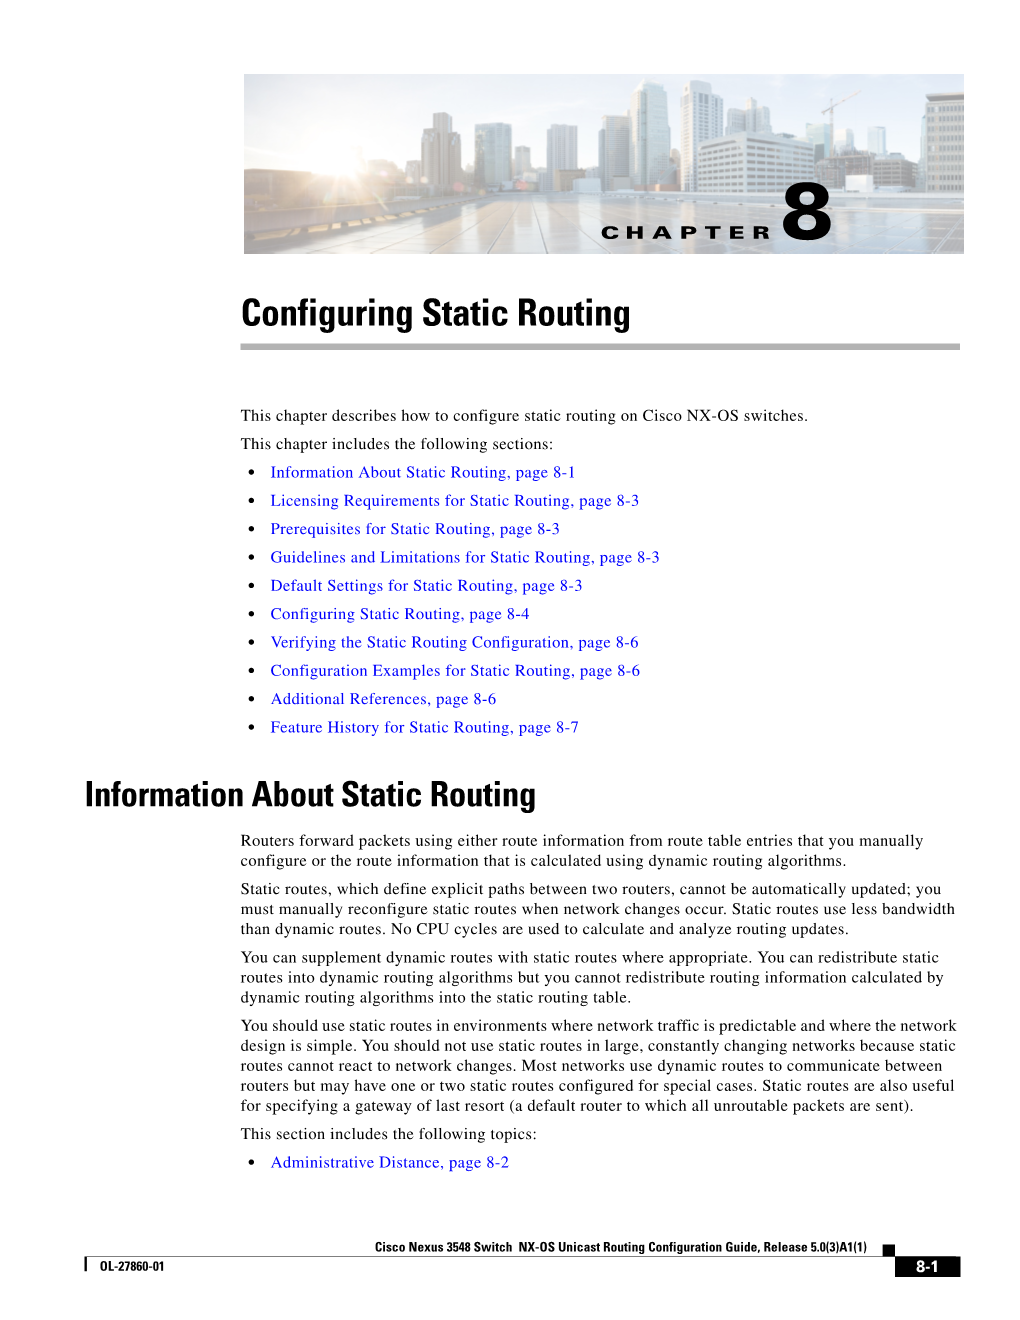 Configuring Static Routing